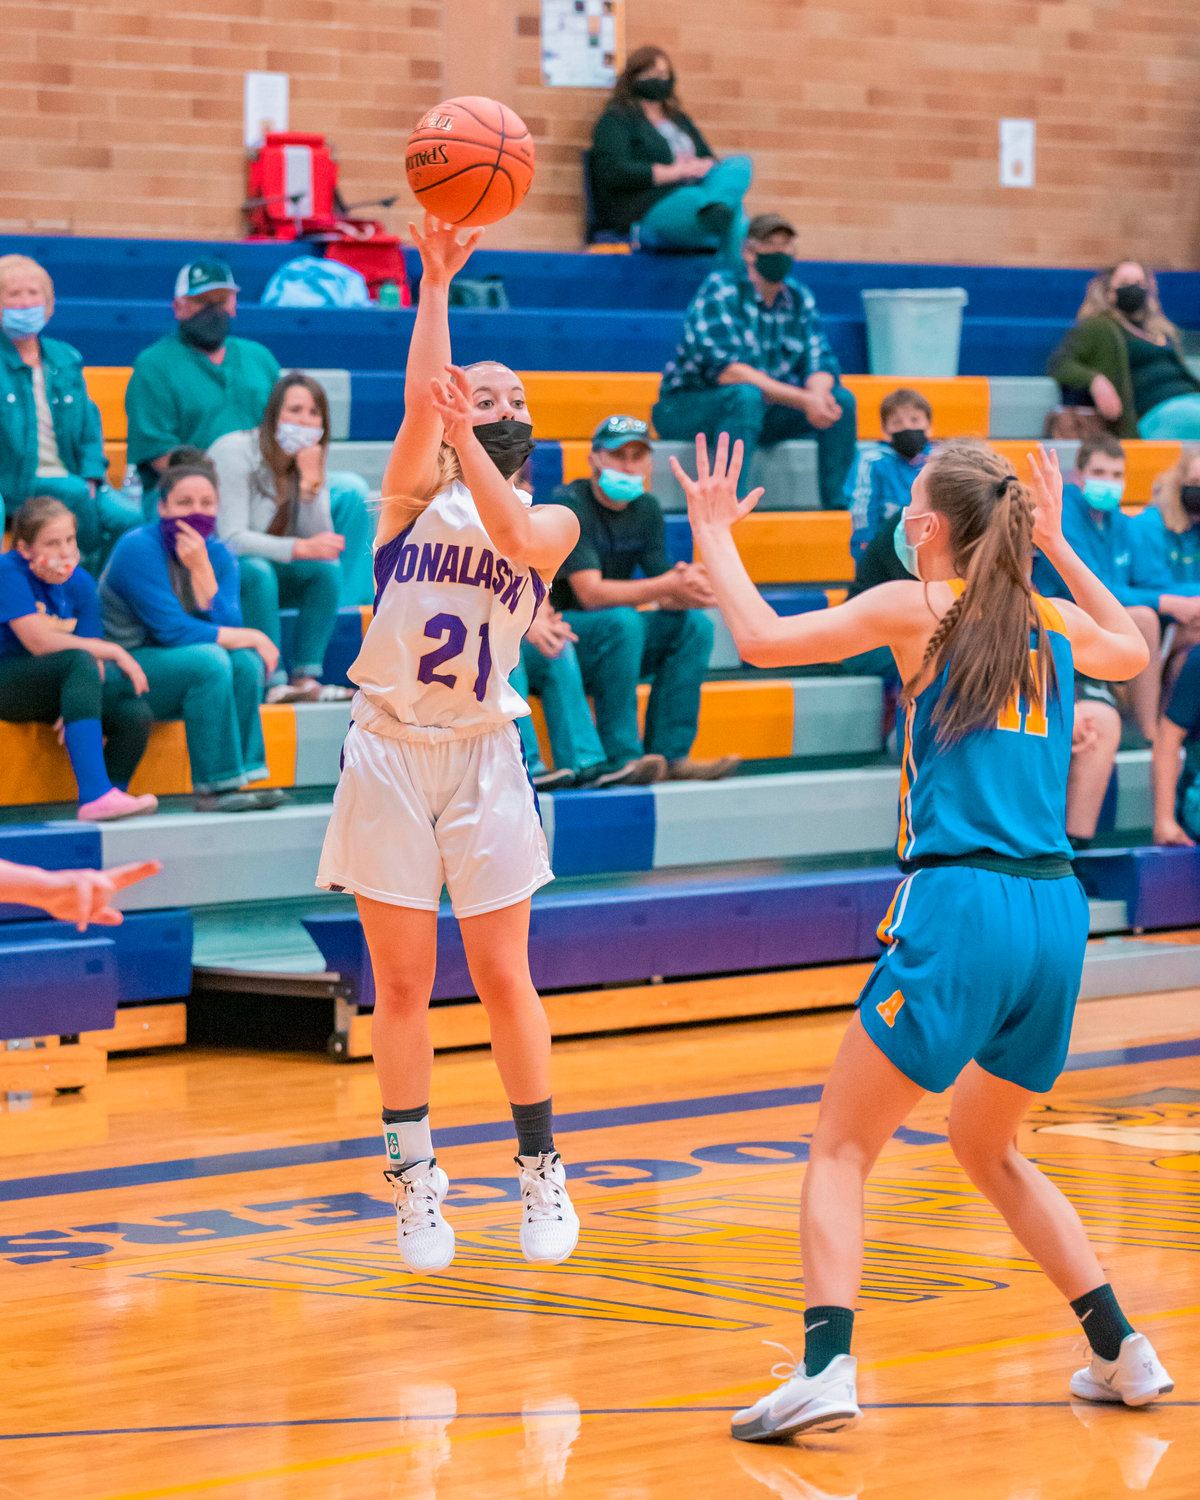 Onalaska’s Callie Lawrence (21) looks to pass during a game against Adna on Thursday.